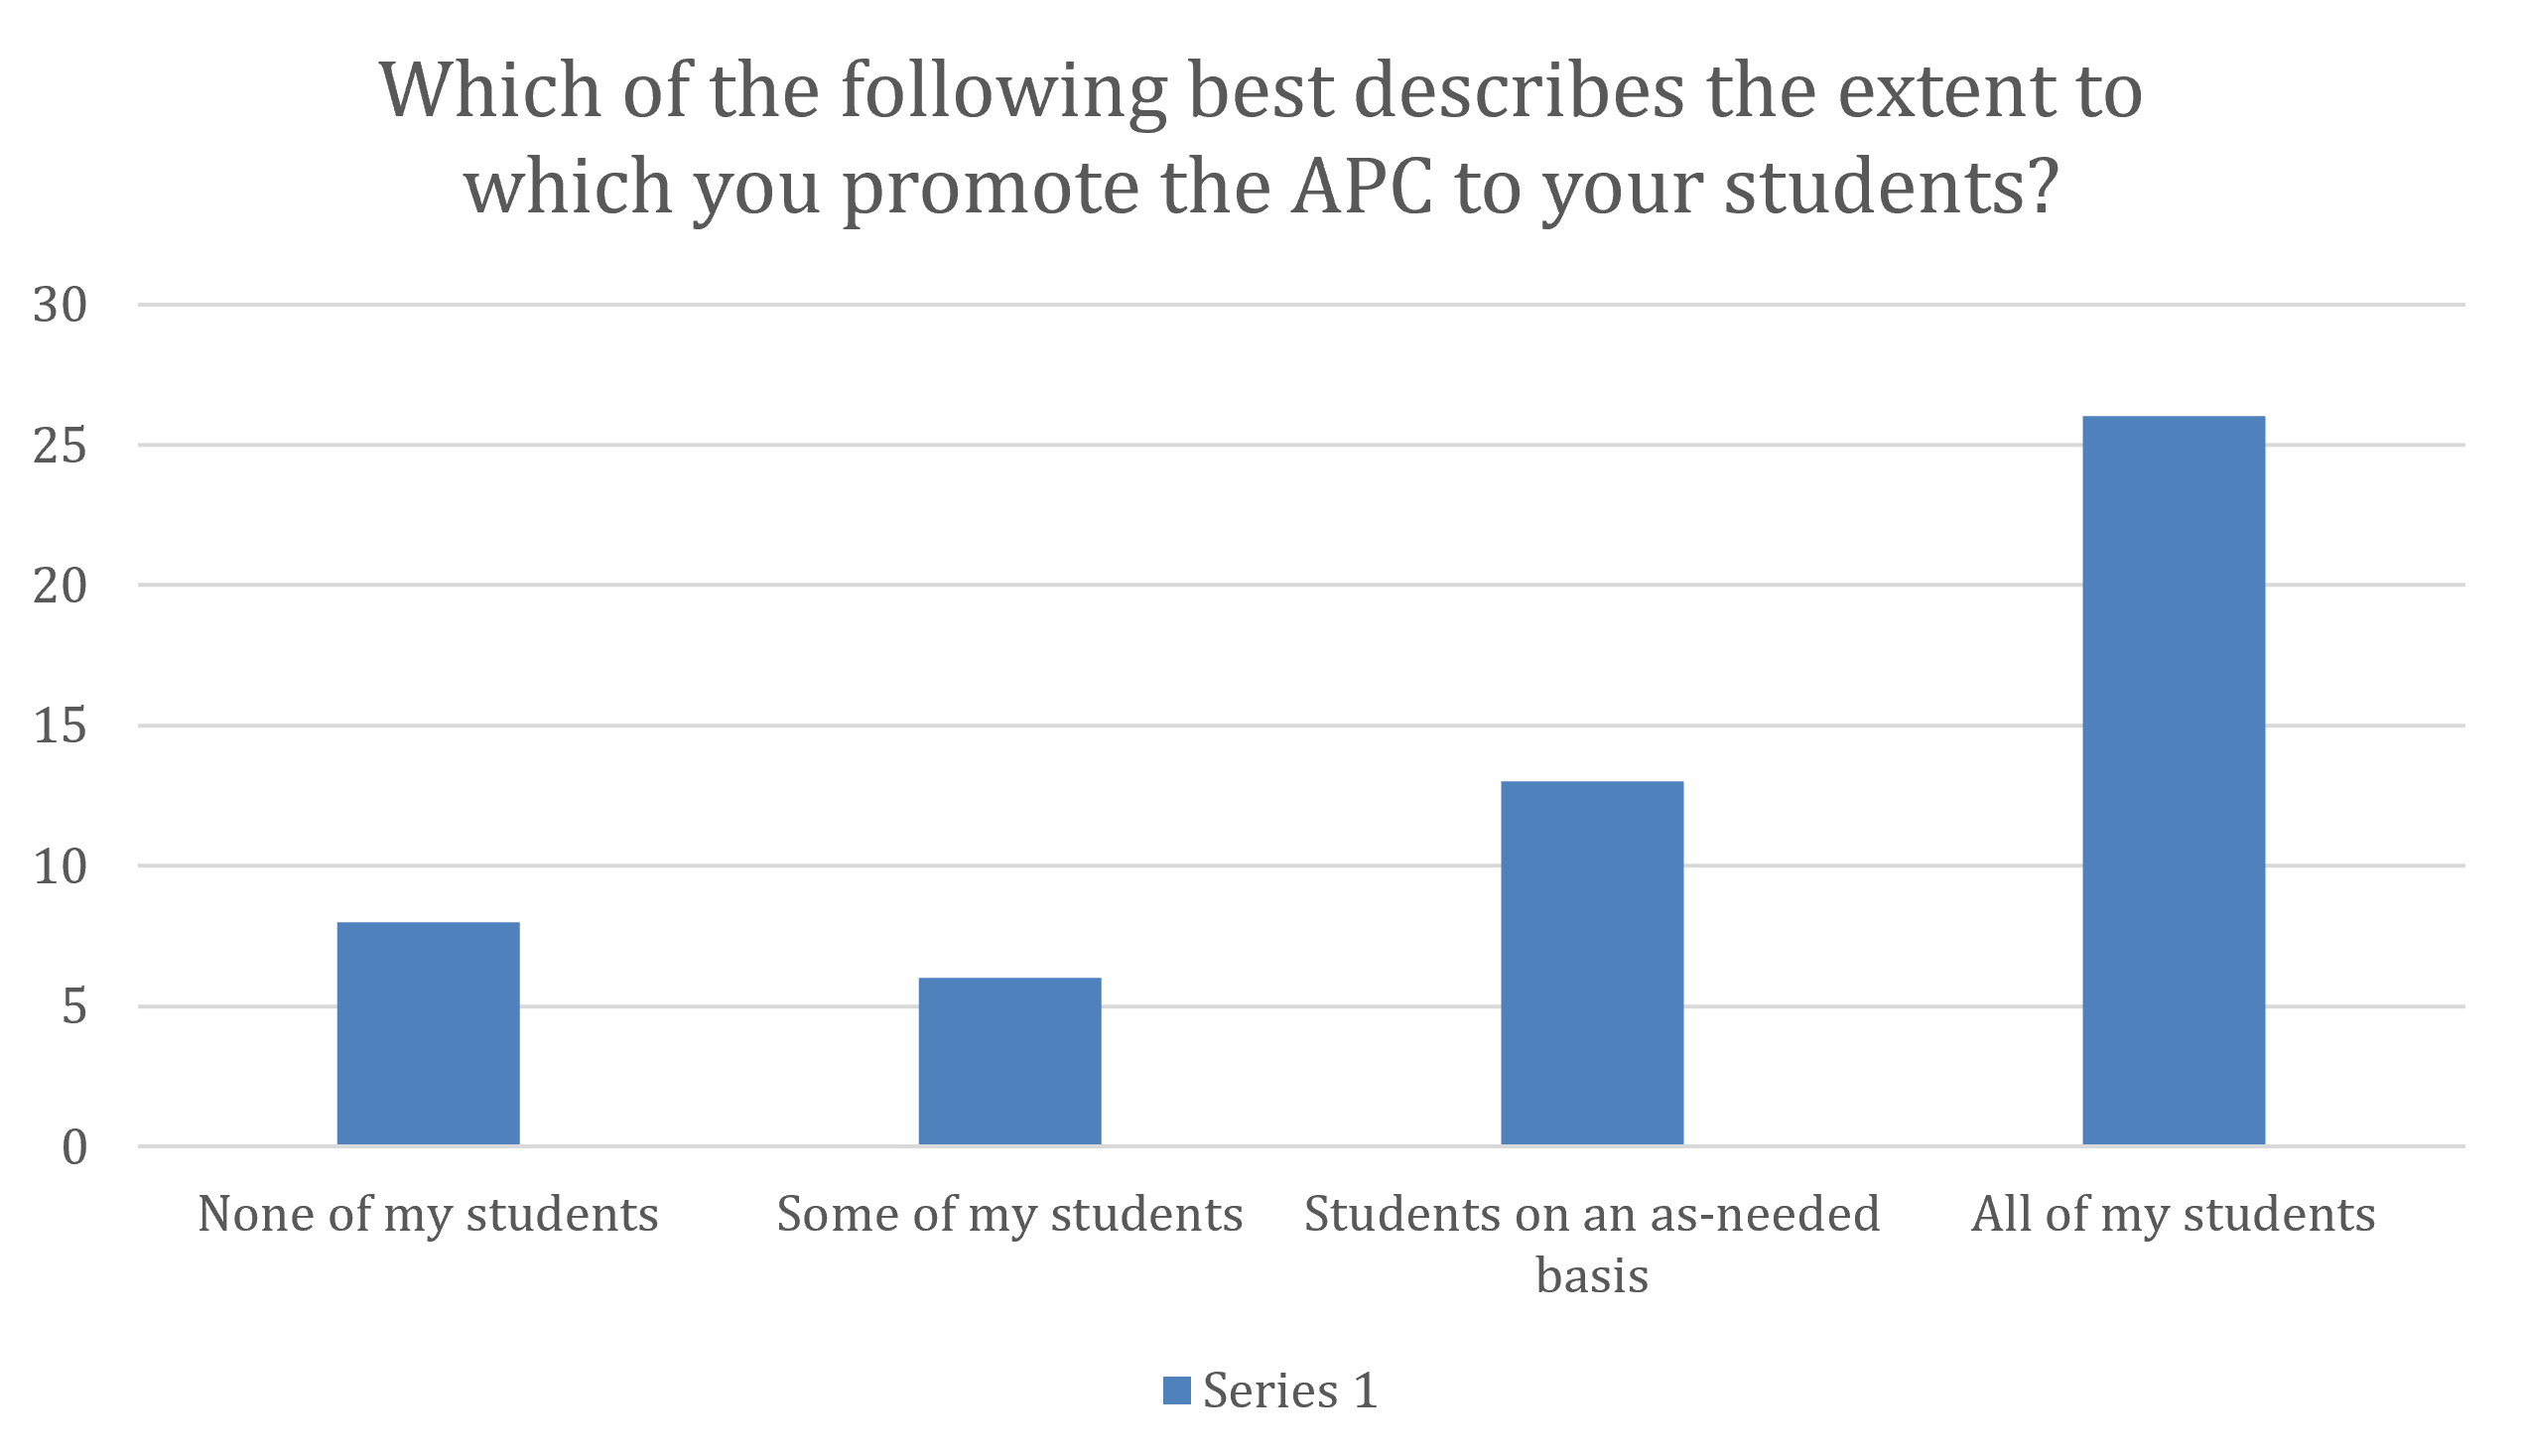 Which of the following best describes the extent to which you promote the APC to your students?